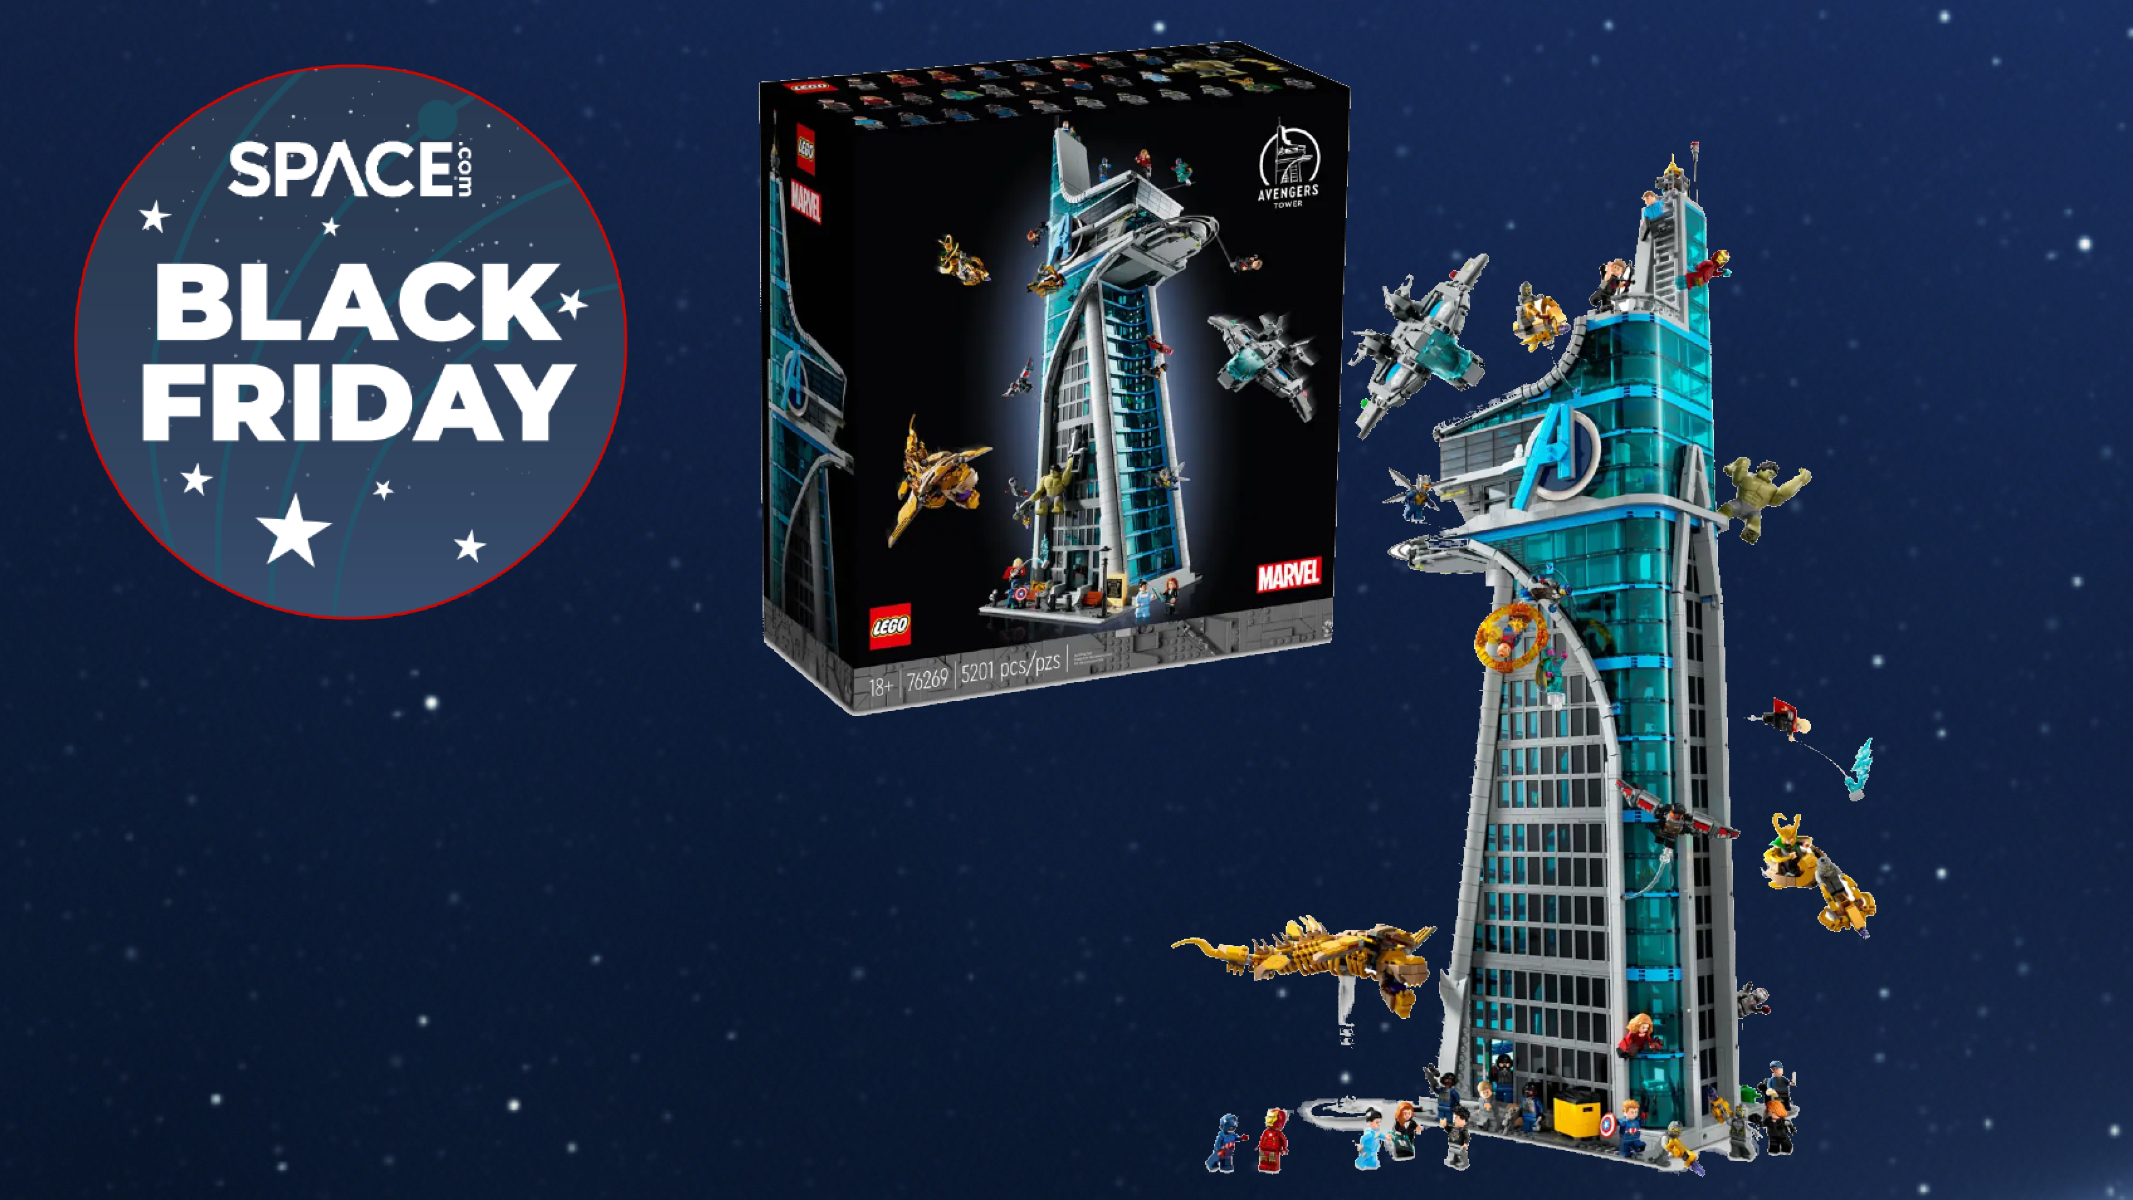 This huge Lego Marvels Avengers Tower comes with free gifts for Black Friday Space